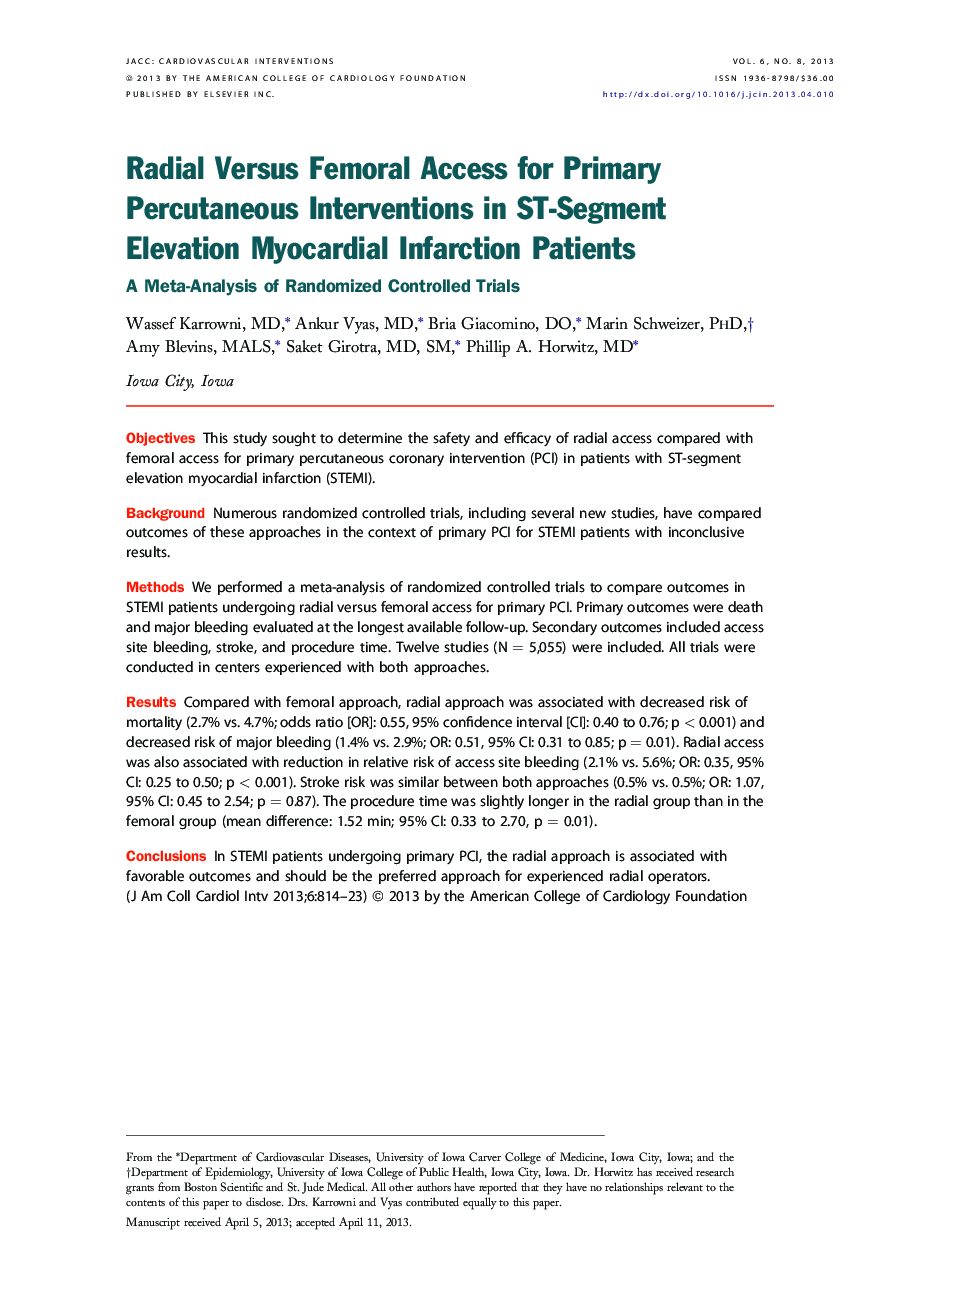 Radial Versus Femoral Access for Primary Percutaneous Interventions in ST-Segment Elevation Myocardial Infarction Patients : A Meta-Analysis of Randomized Controlled Trials